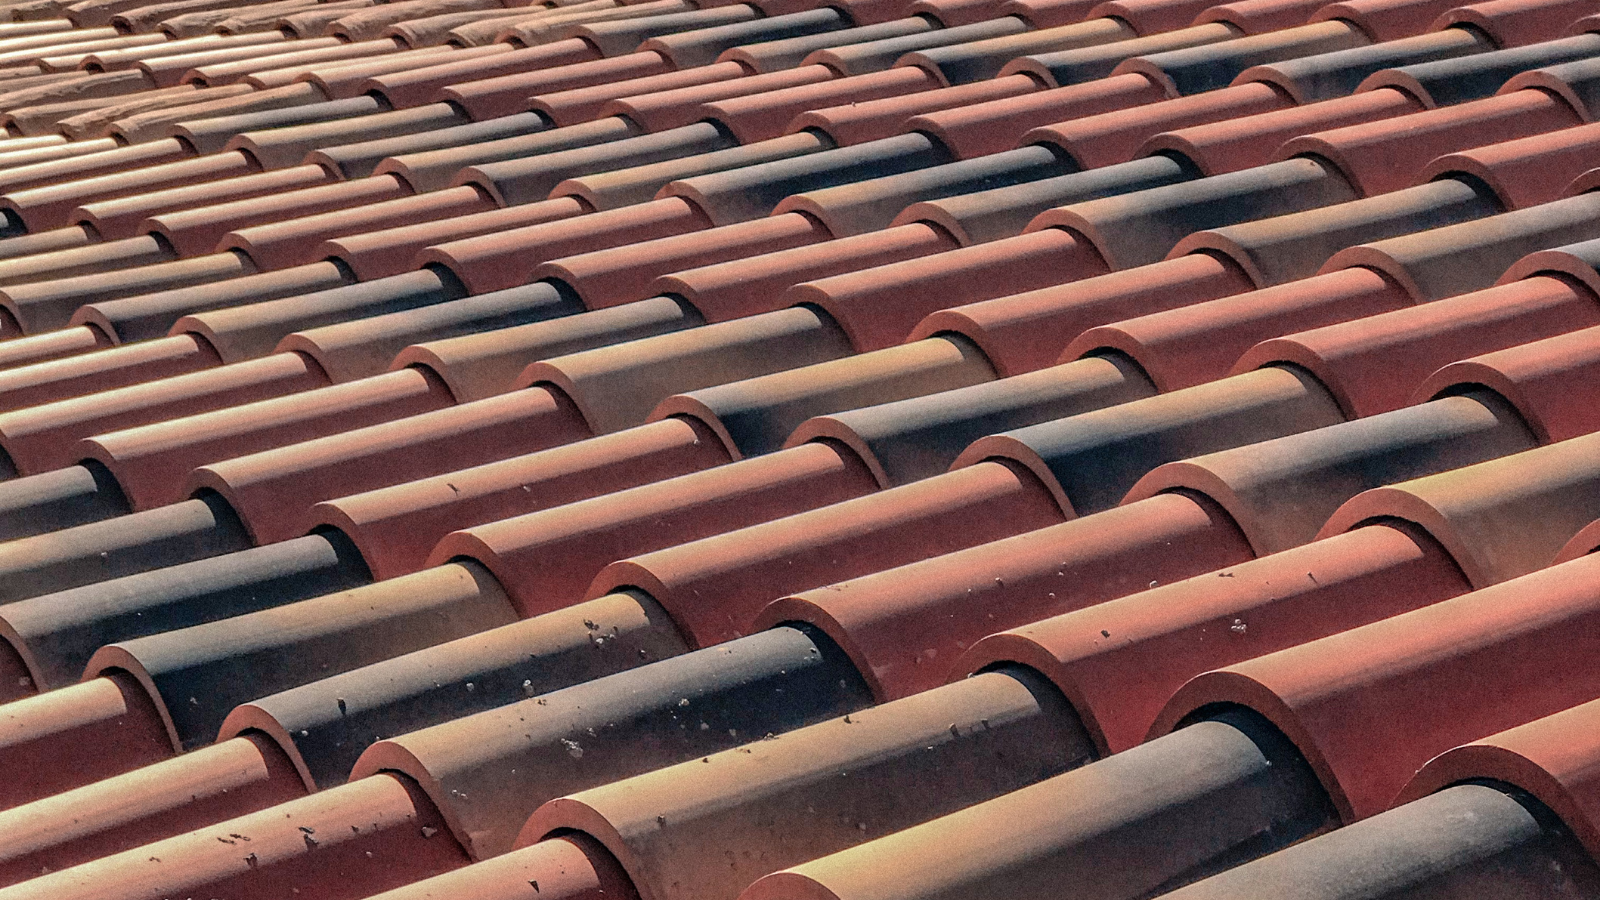 The Top Roofing Materials